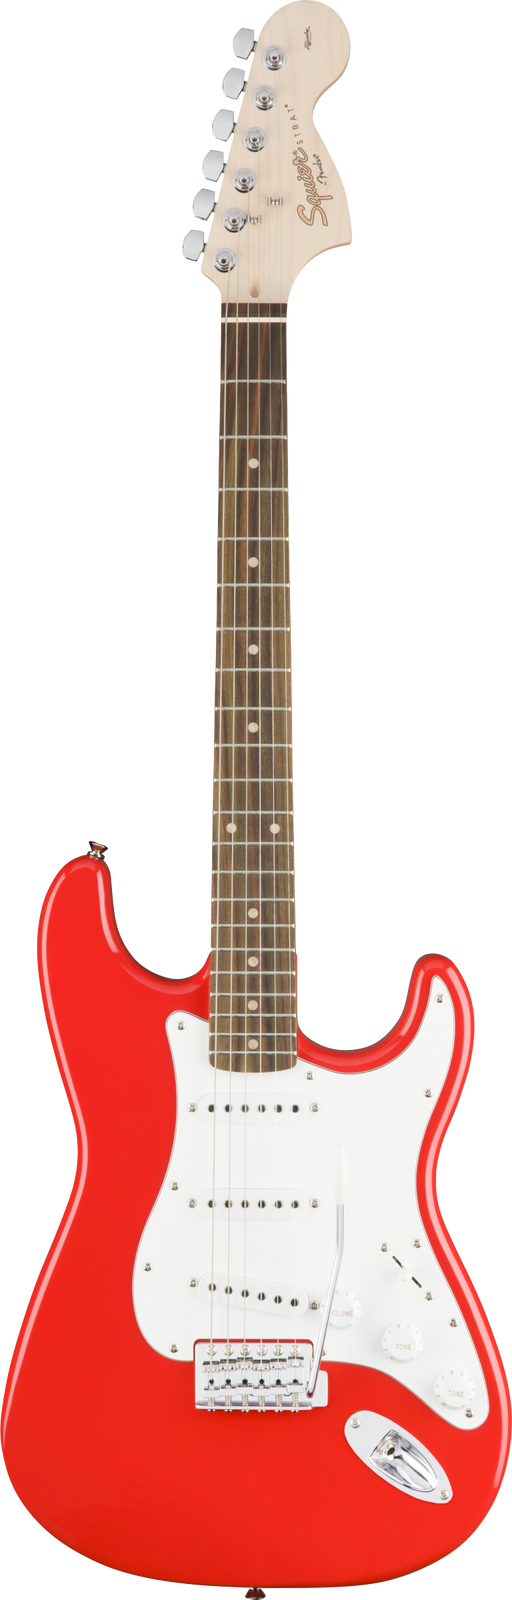 Squier Affinity Series Stratocaster Laurel Fingerboard Race Red Electric Guitar